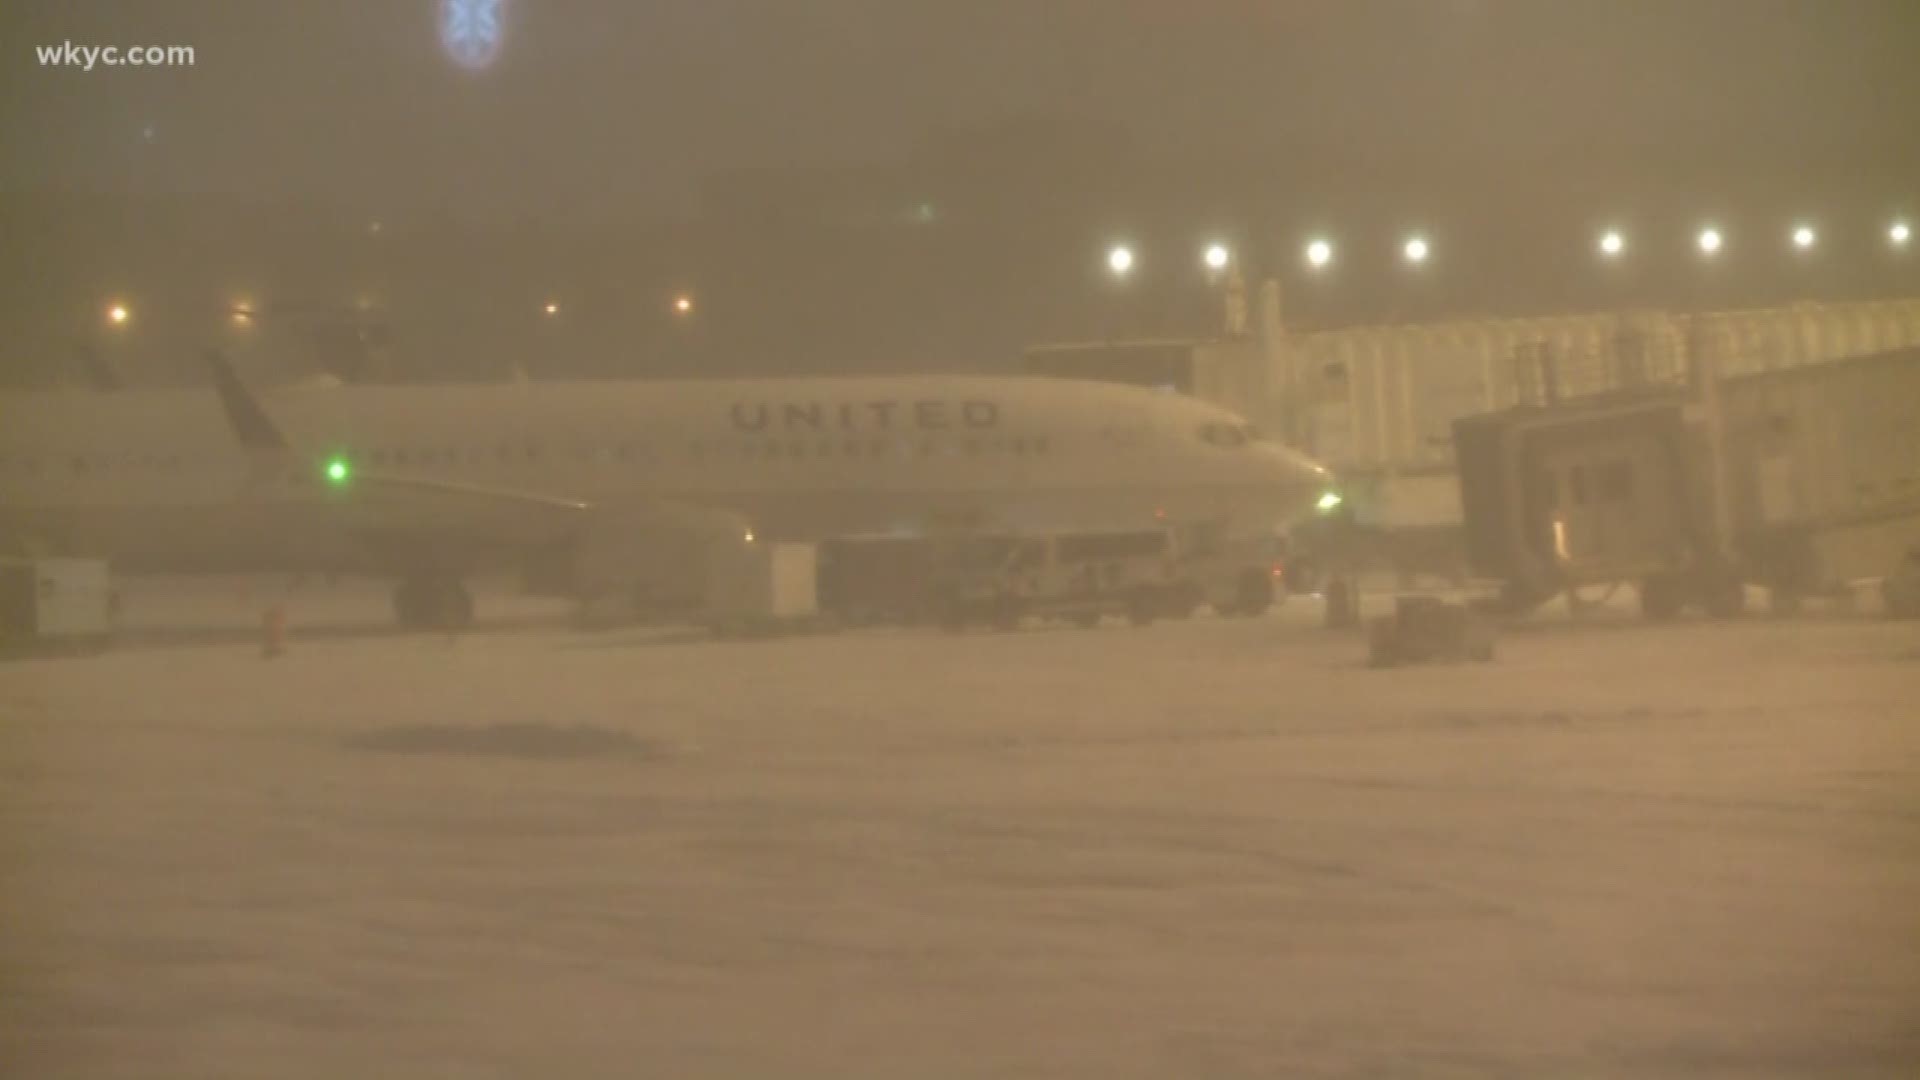 Jan. 19, 2019: It has been a tough travel day as this weekend's winter storm is causing cancellations and delays at Cleveland Hopkins International Airport. WKYC's Ray Strickland has an update.